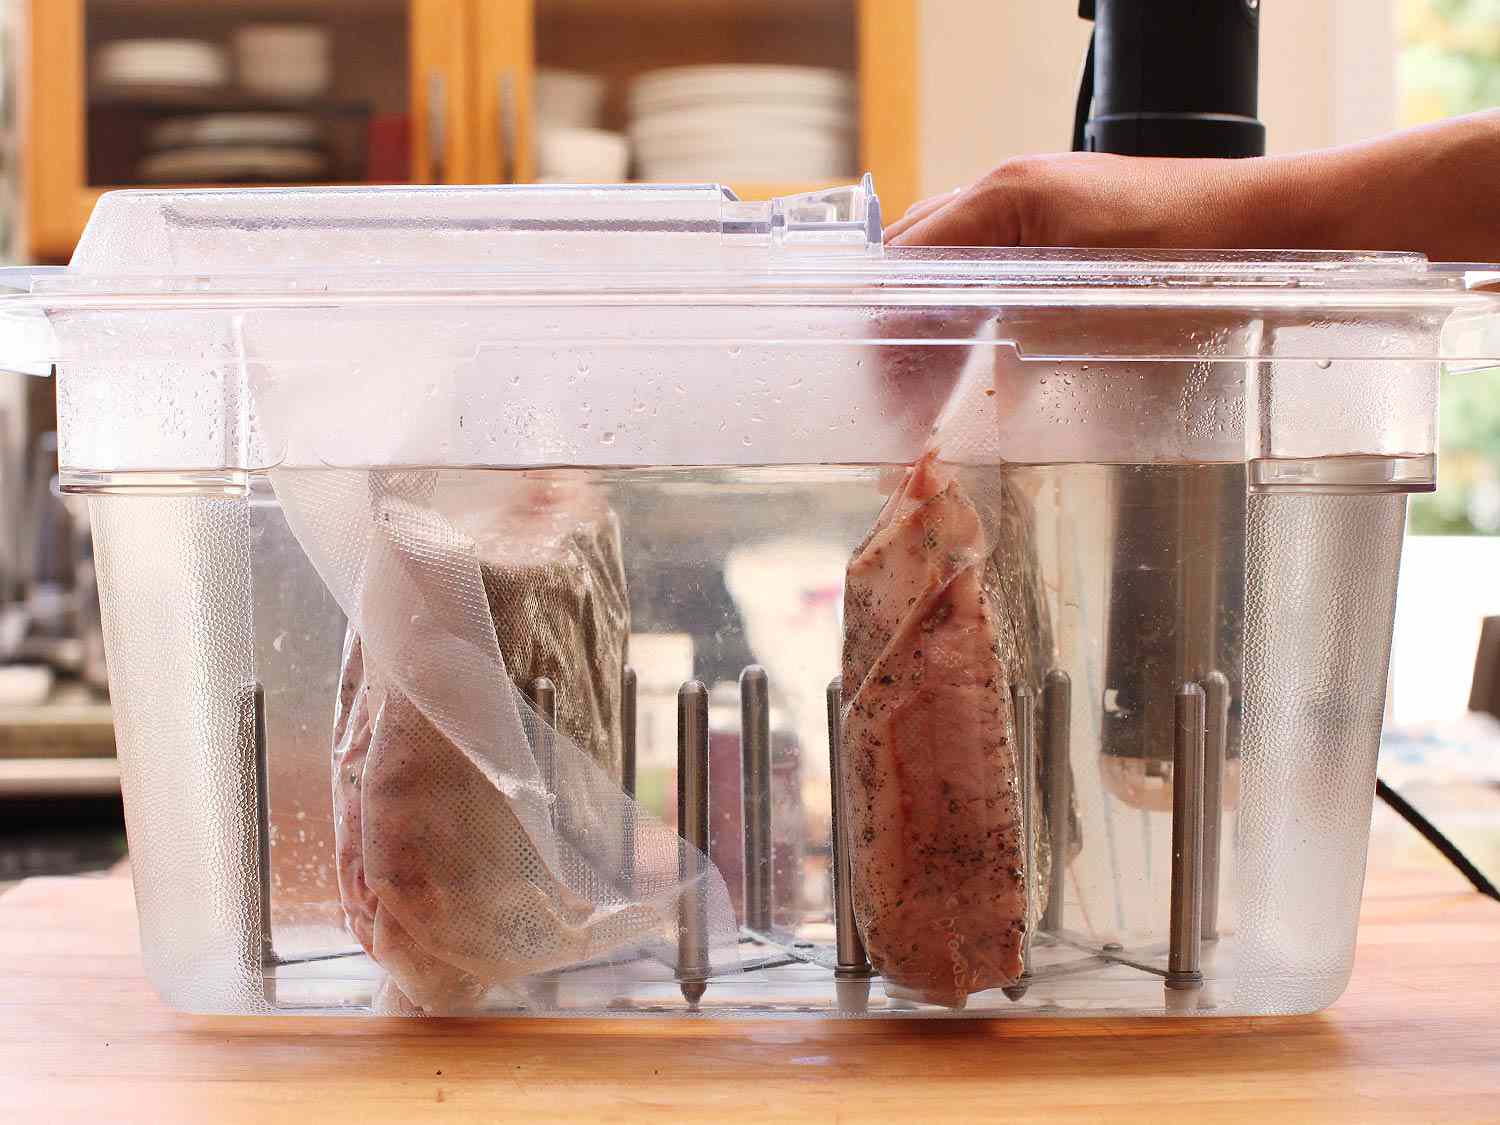 Pieces of vacuum-sealed brisket being placed into sous-vide machine.